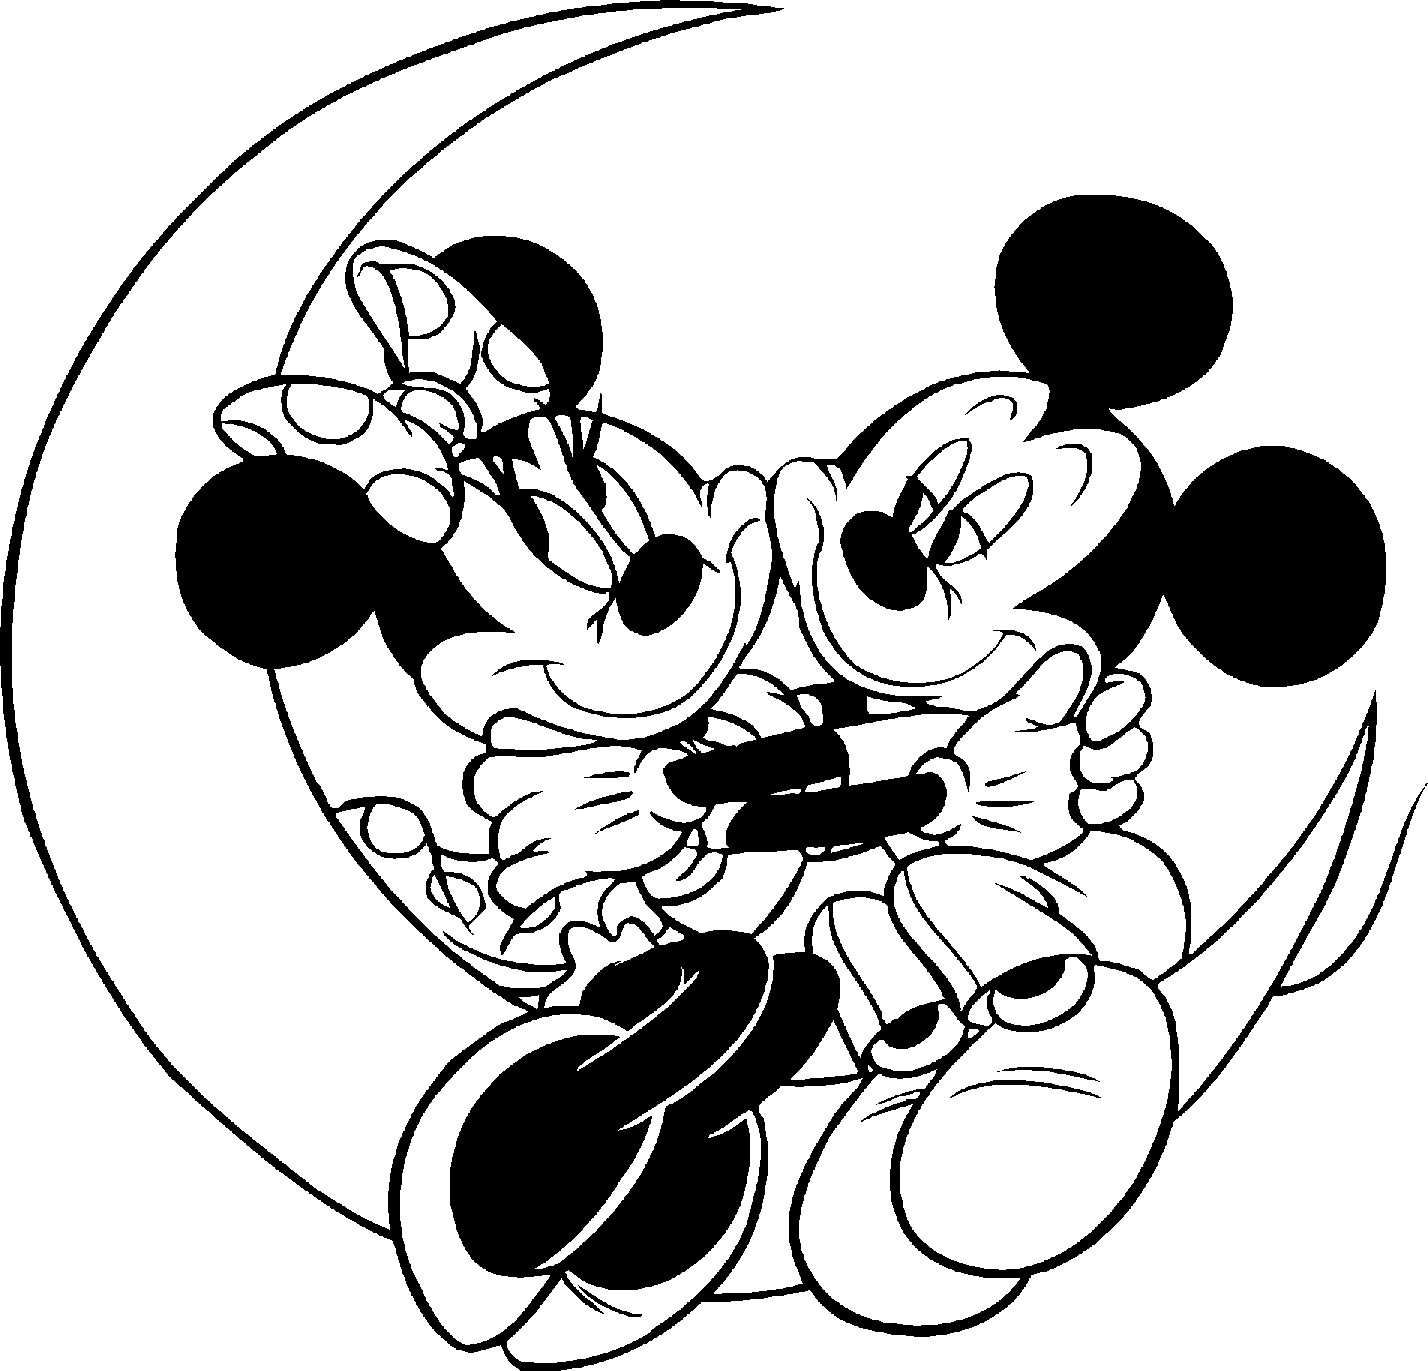 Minnie Mouse Printable Coloring Pages
 Minnie Mouse Coloring Pages To Print For Free